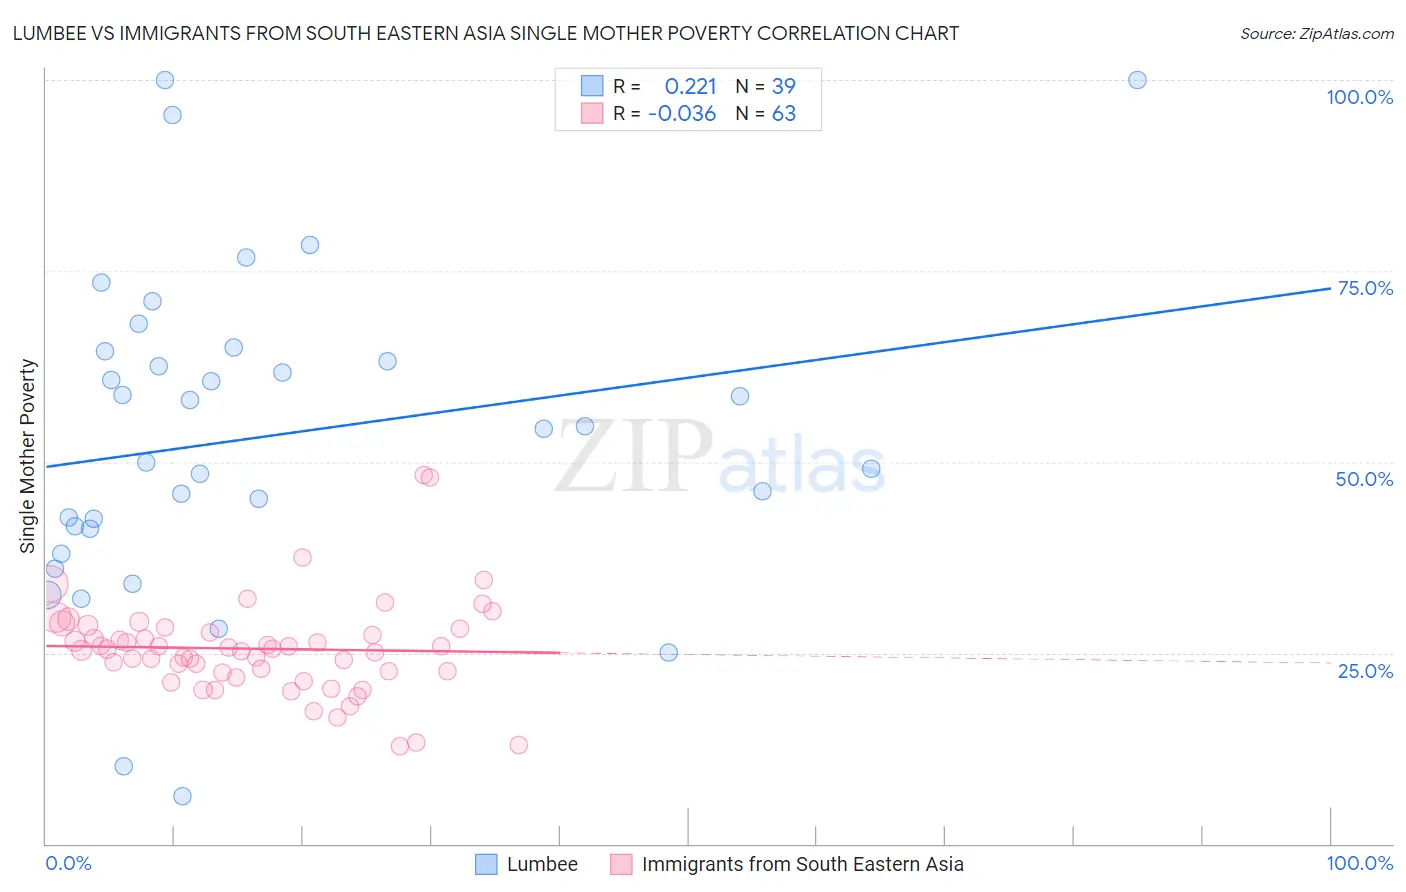 Lumbee vs Immigrants from South Eastern Asia Single Mother Poverty